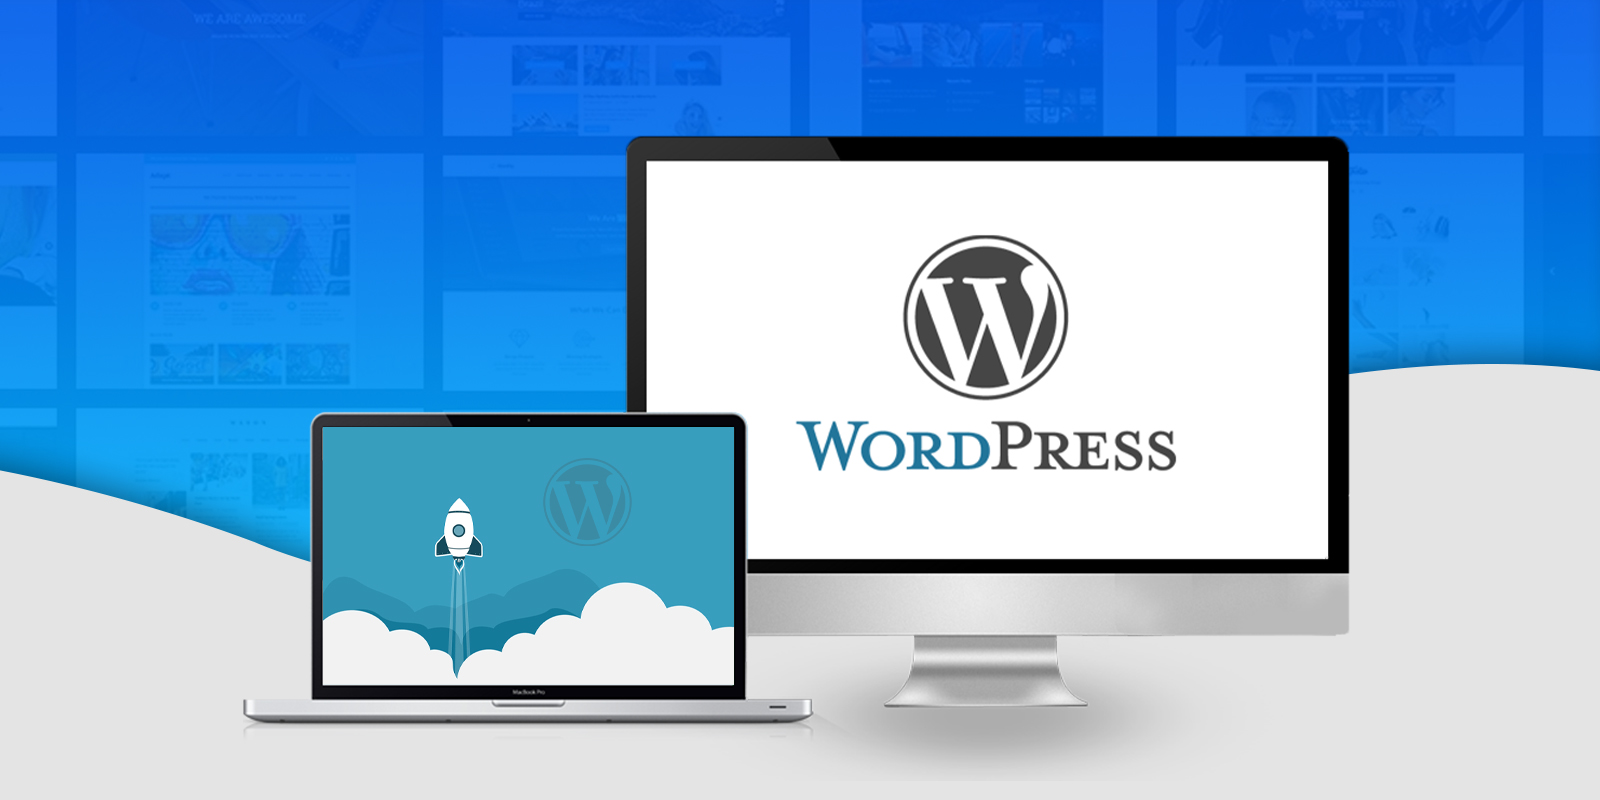 40+ WordPress Tools to Rank Higher in Search Engines